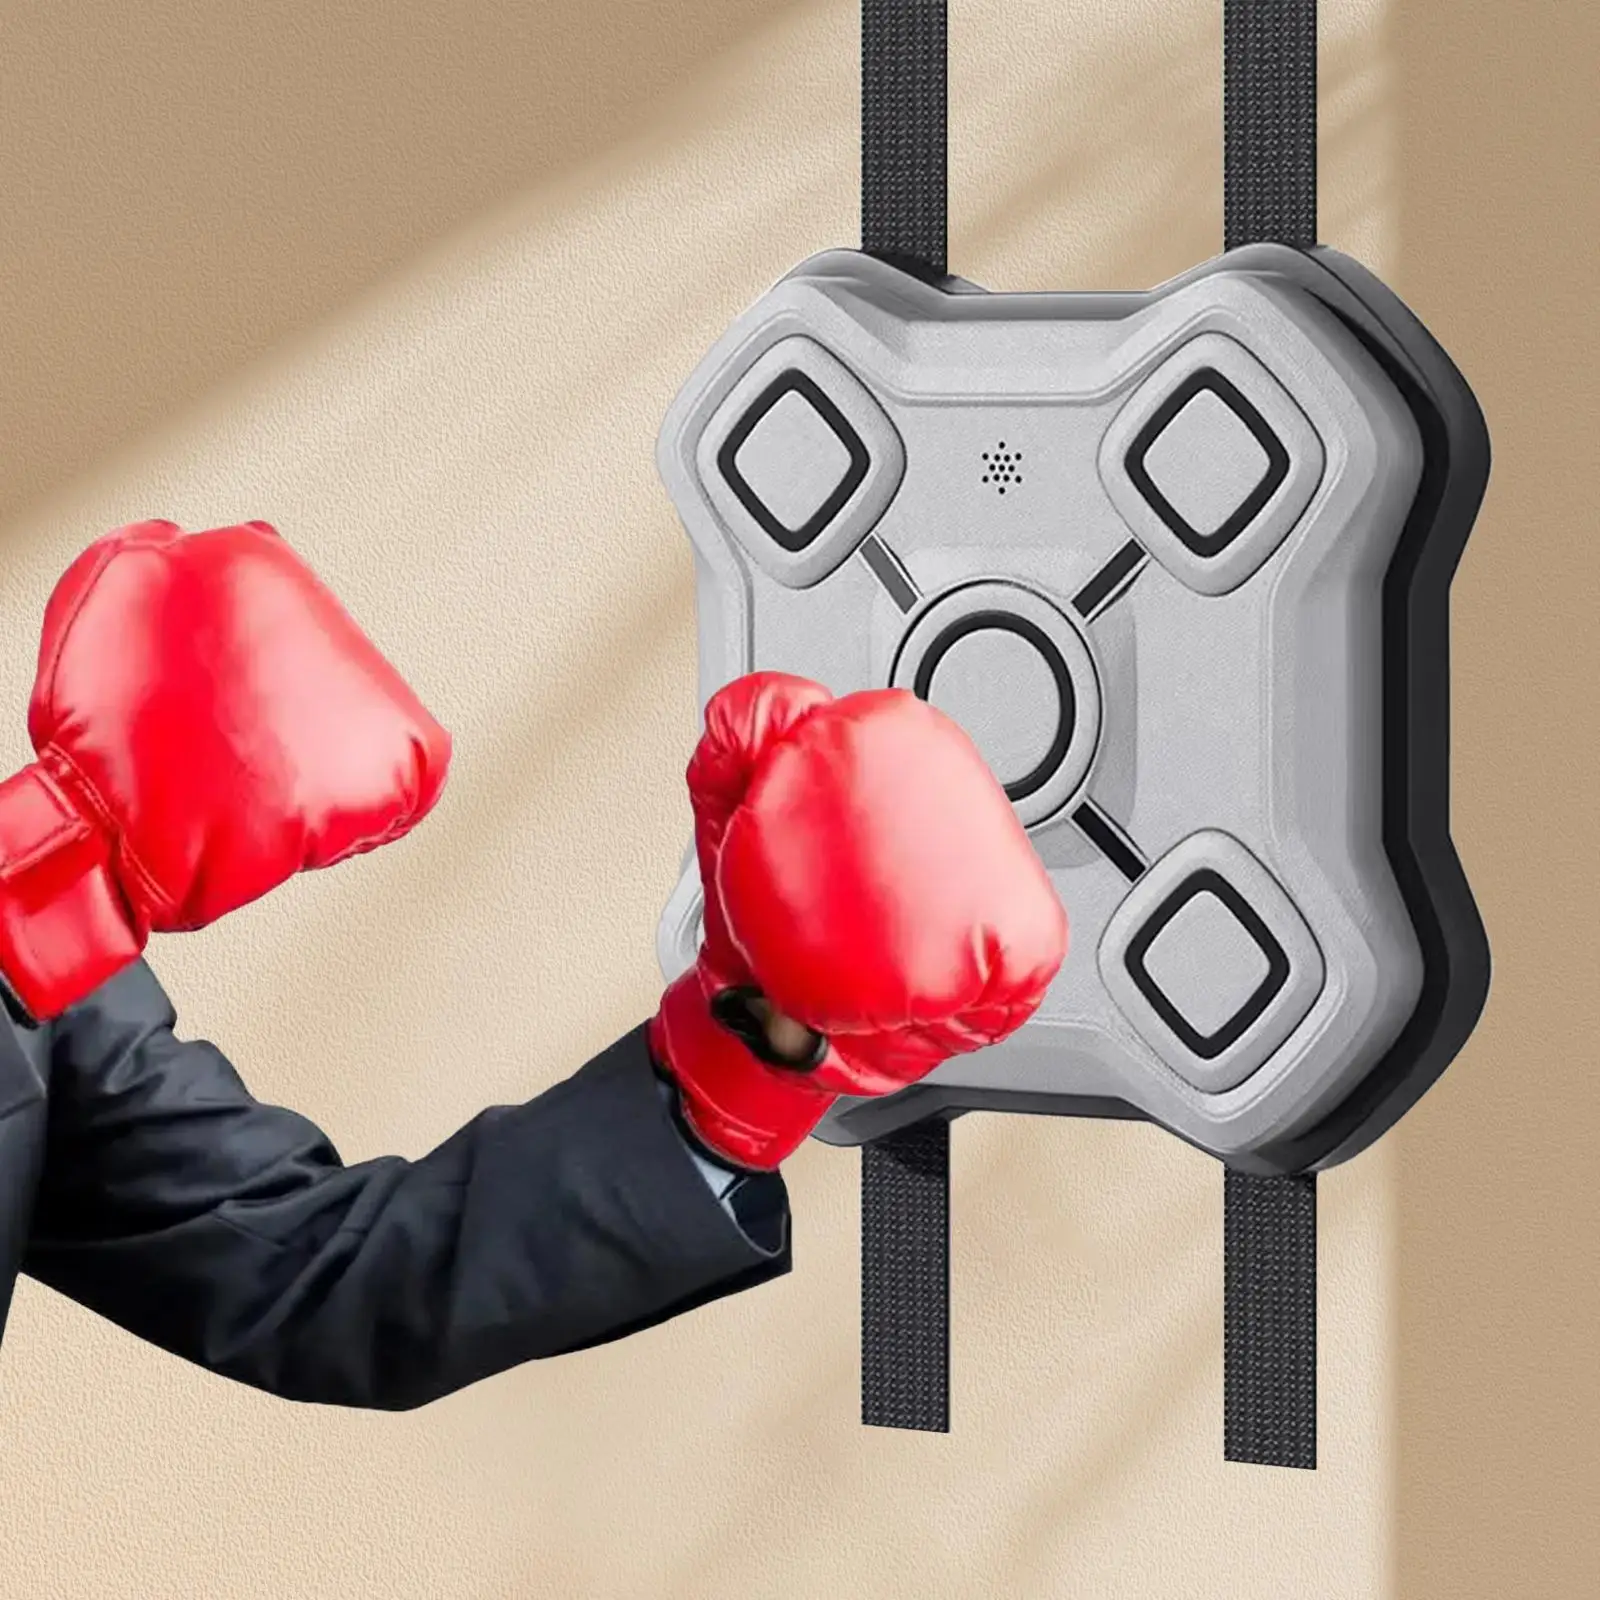 Music Boxing Machine Punching Pad Walls Mounted Kids Adults Child USB Rechargeable Sports Gym Practice Games Smart Electronic